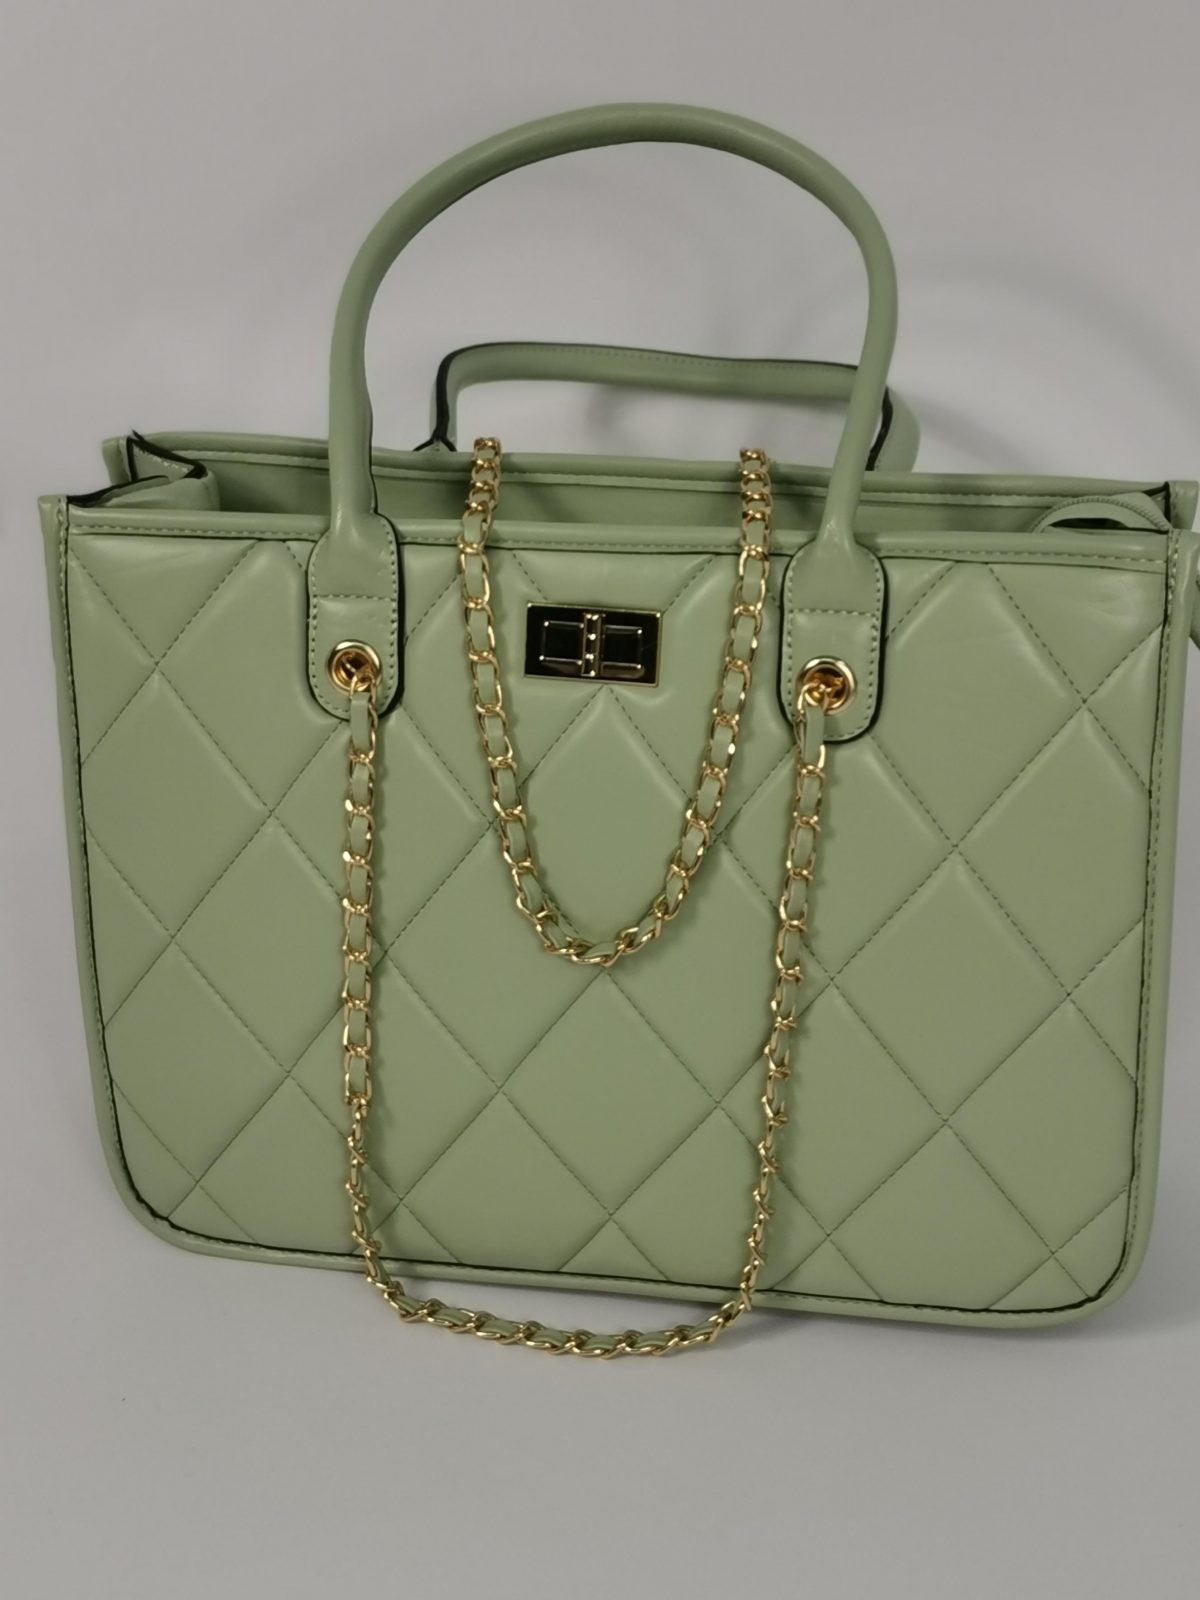 Large handbag in light green with gold chain